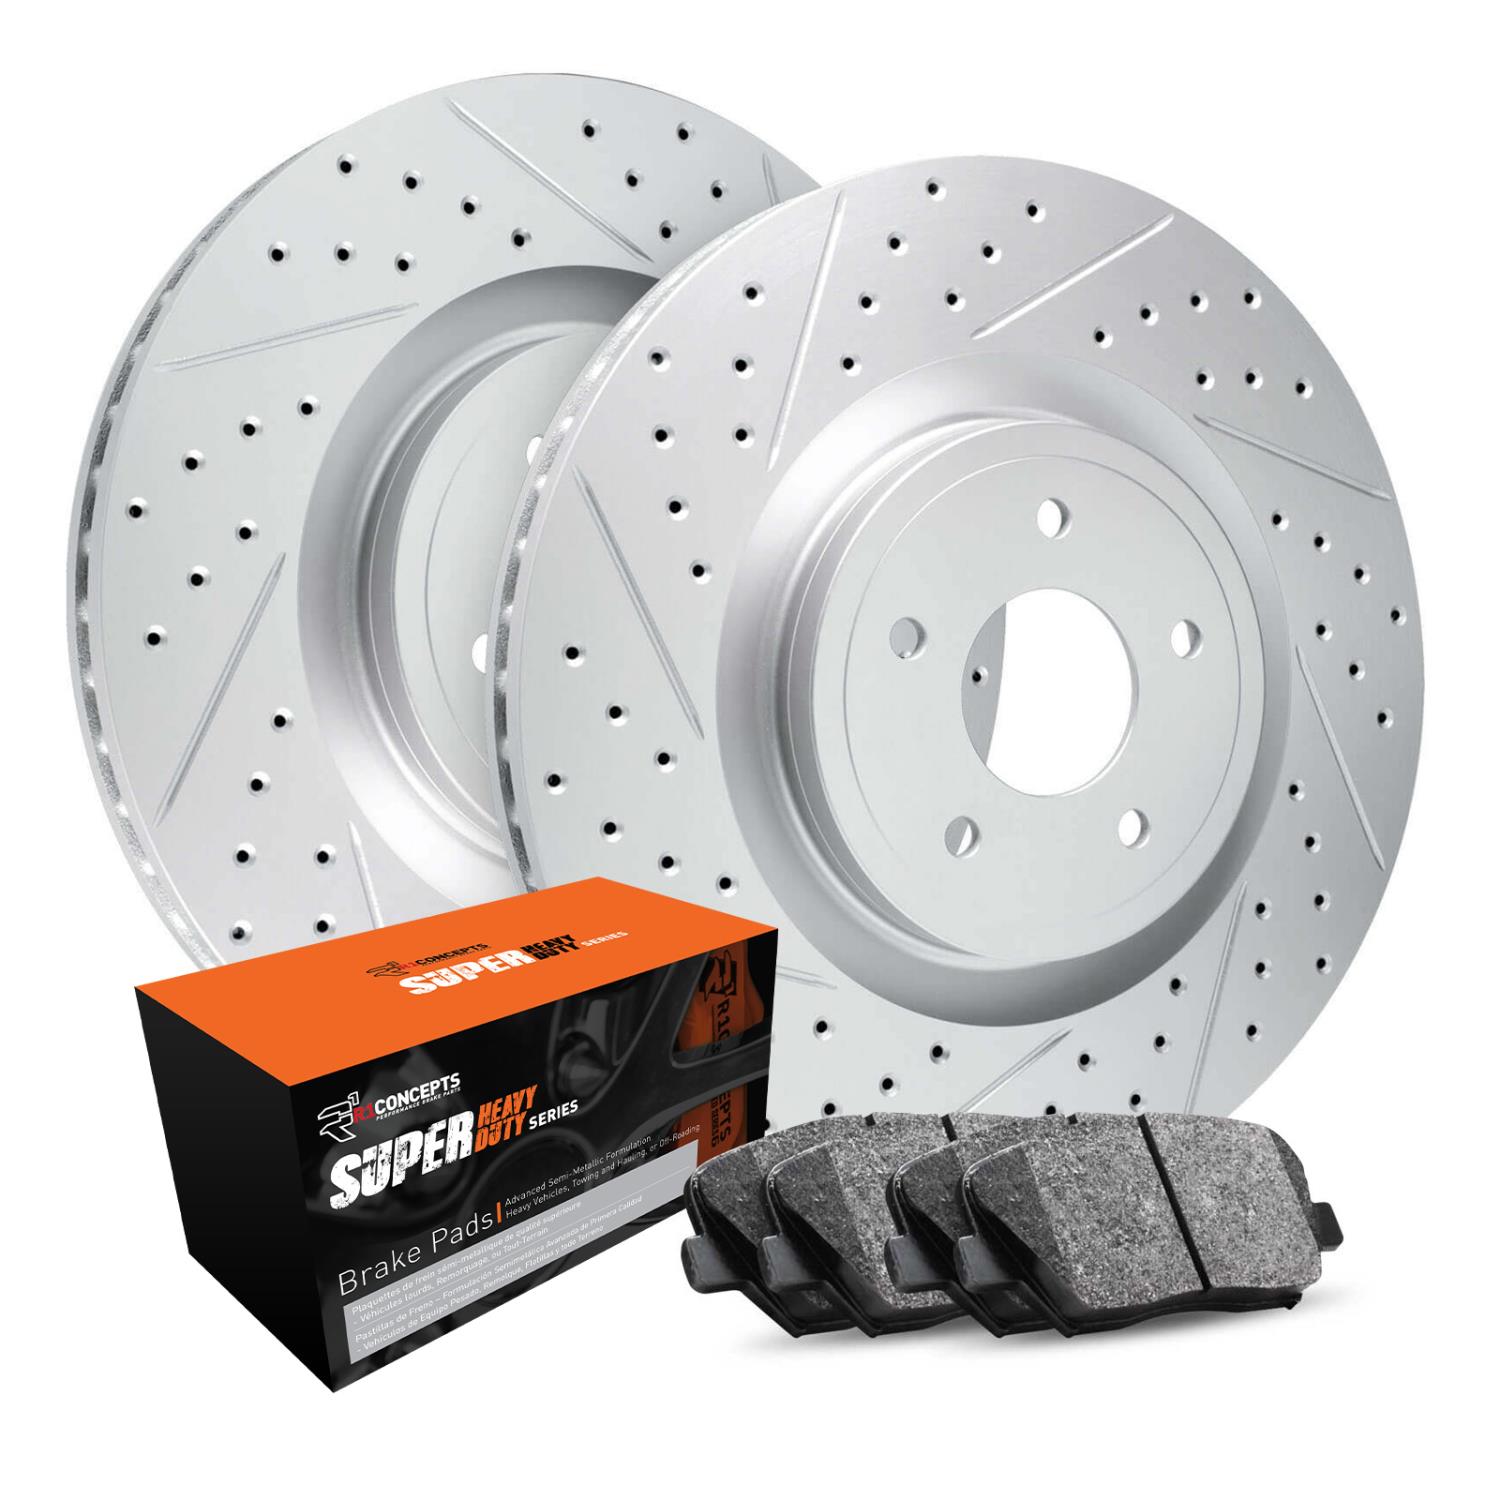 GEO-Carbon Drilled & Slotted Brake Rotor Set w/Super-Duty Pads, 2002-2018 Fits Multiple Makes/Models, Position: Rear